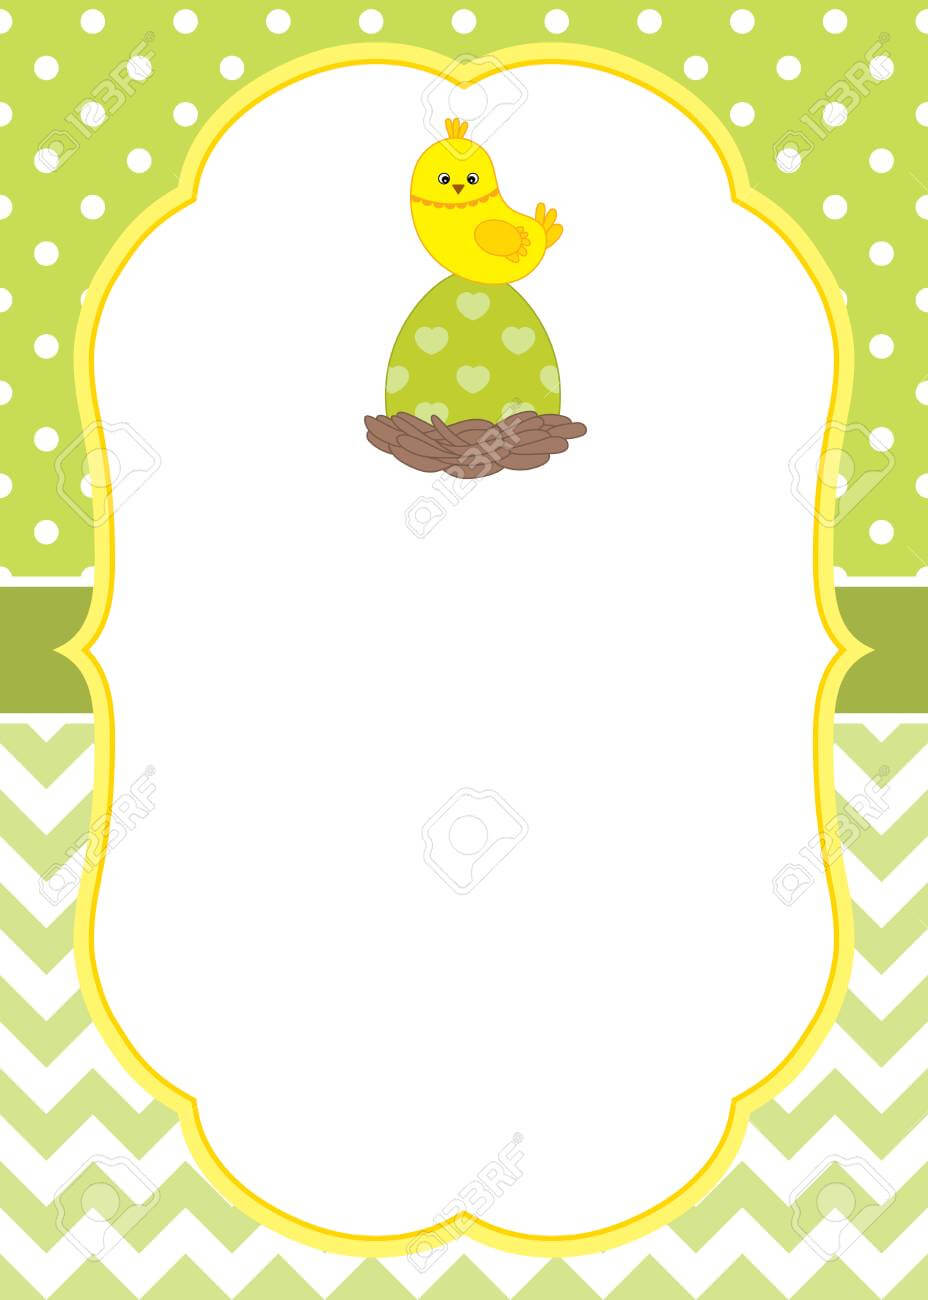 Vector Card Template With A Cute Chick On Polka Dot And Chevron Background.  Vector Easter Egg. Vector Illustration. Throughout Easter Chick Card Template